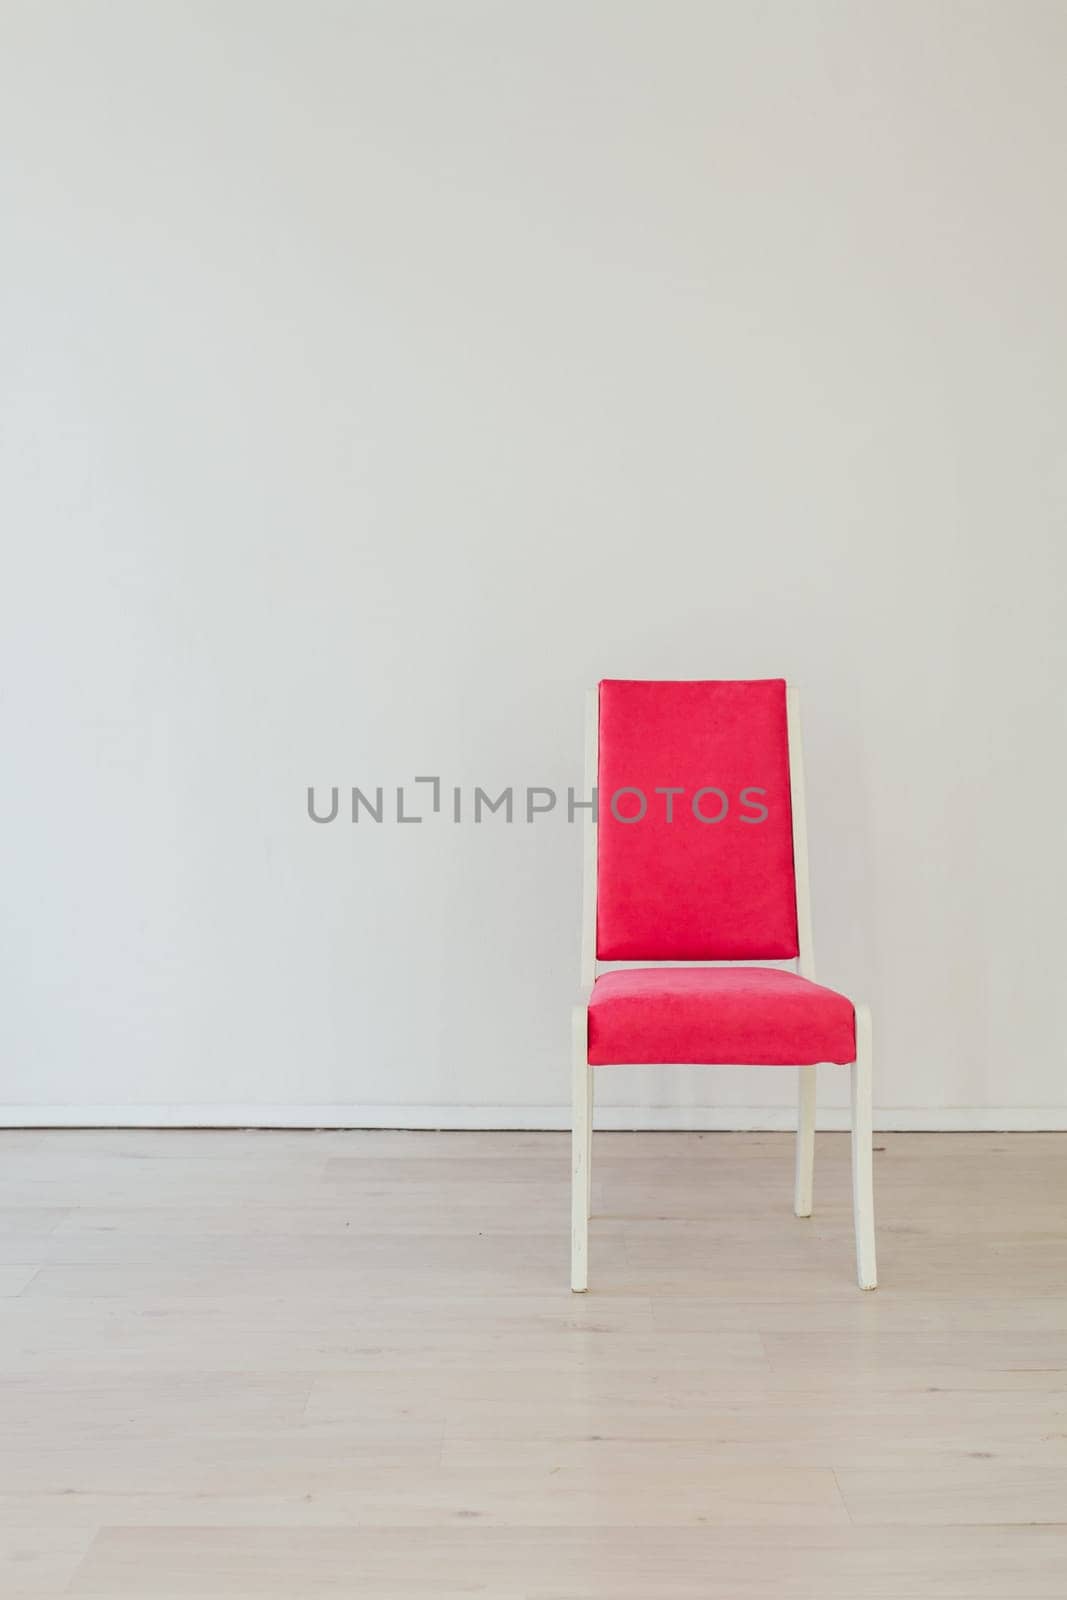 one pink chair in an empty white room